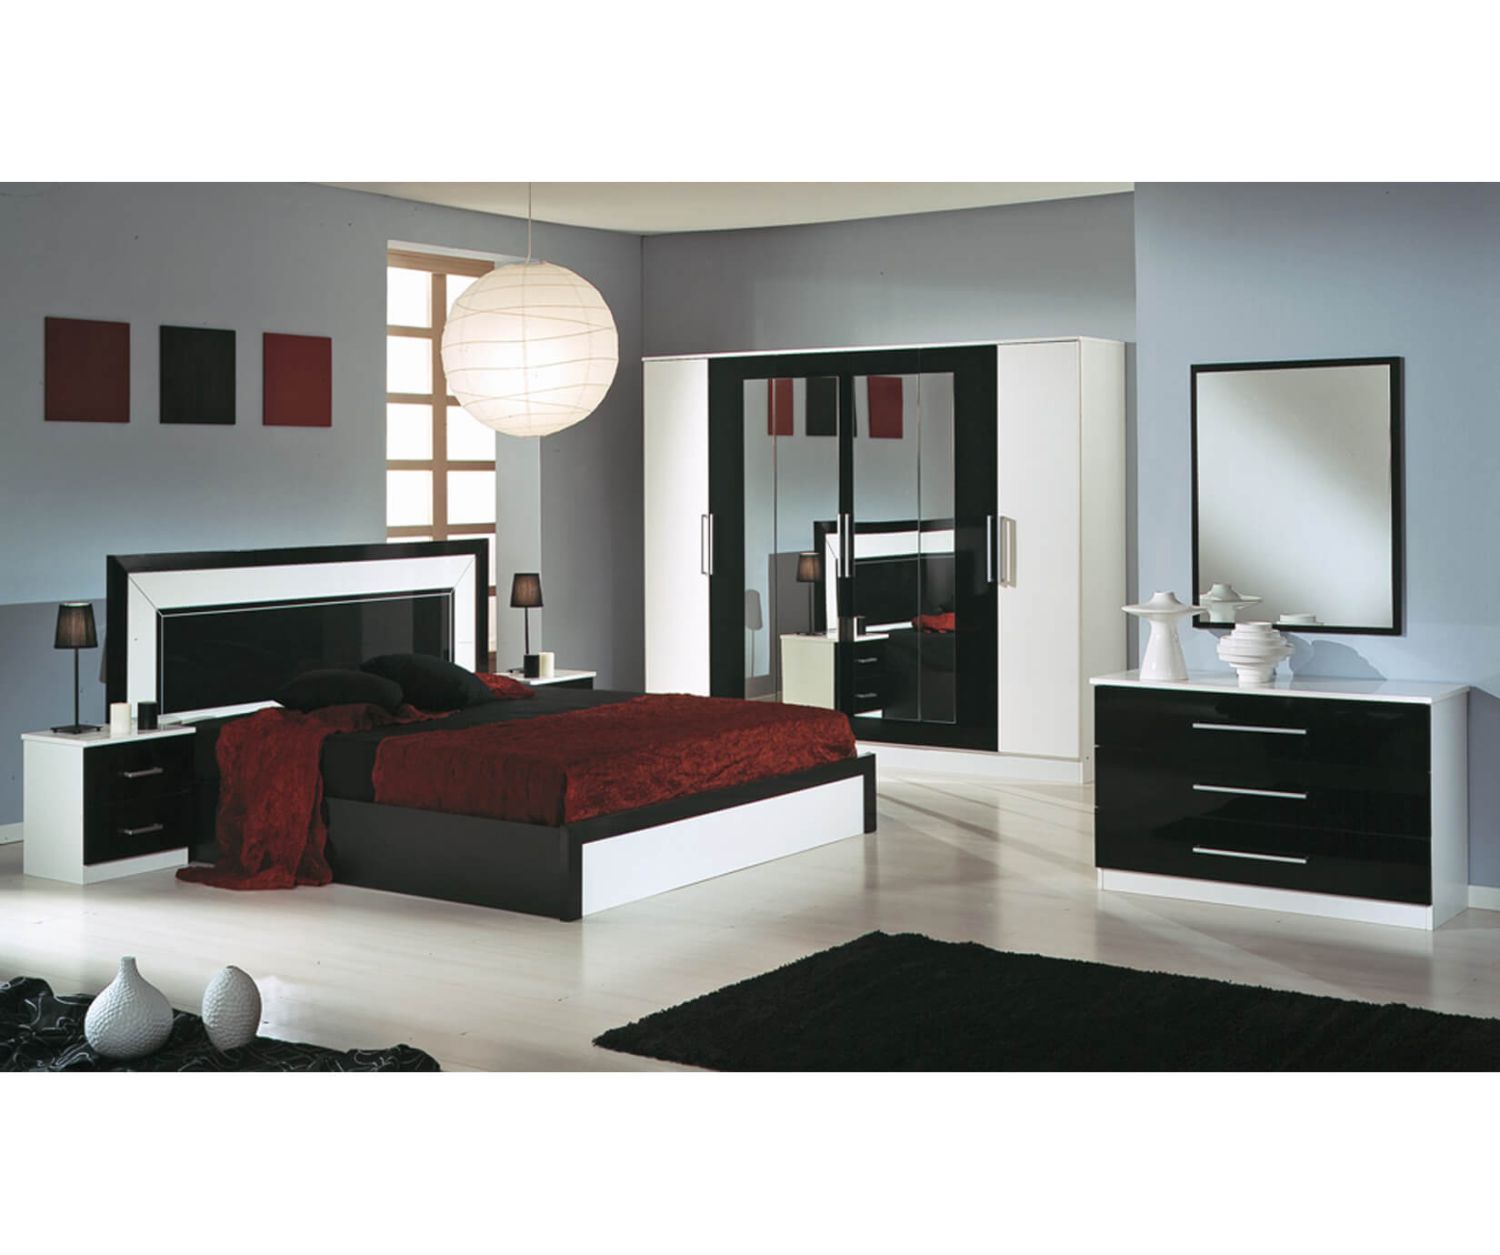 Dima Mobili Miami Black And White Bedroom Set With 6 Door Wardrobe With Regard To Black And White Wardrobes Set (View 4 of 15)